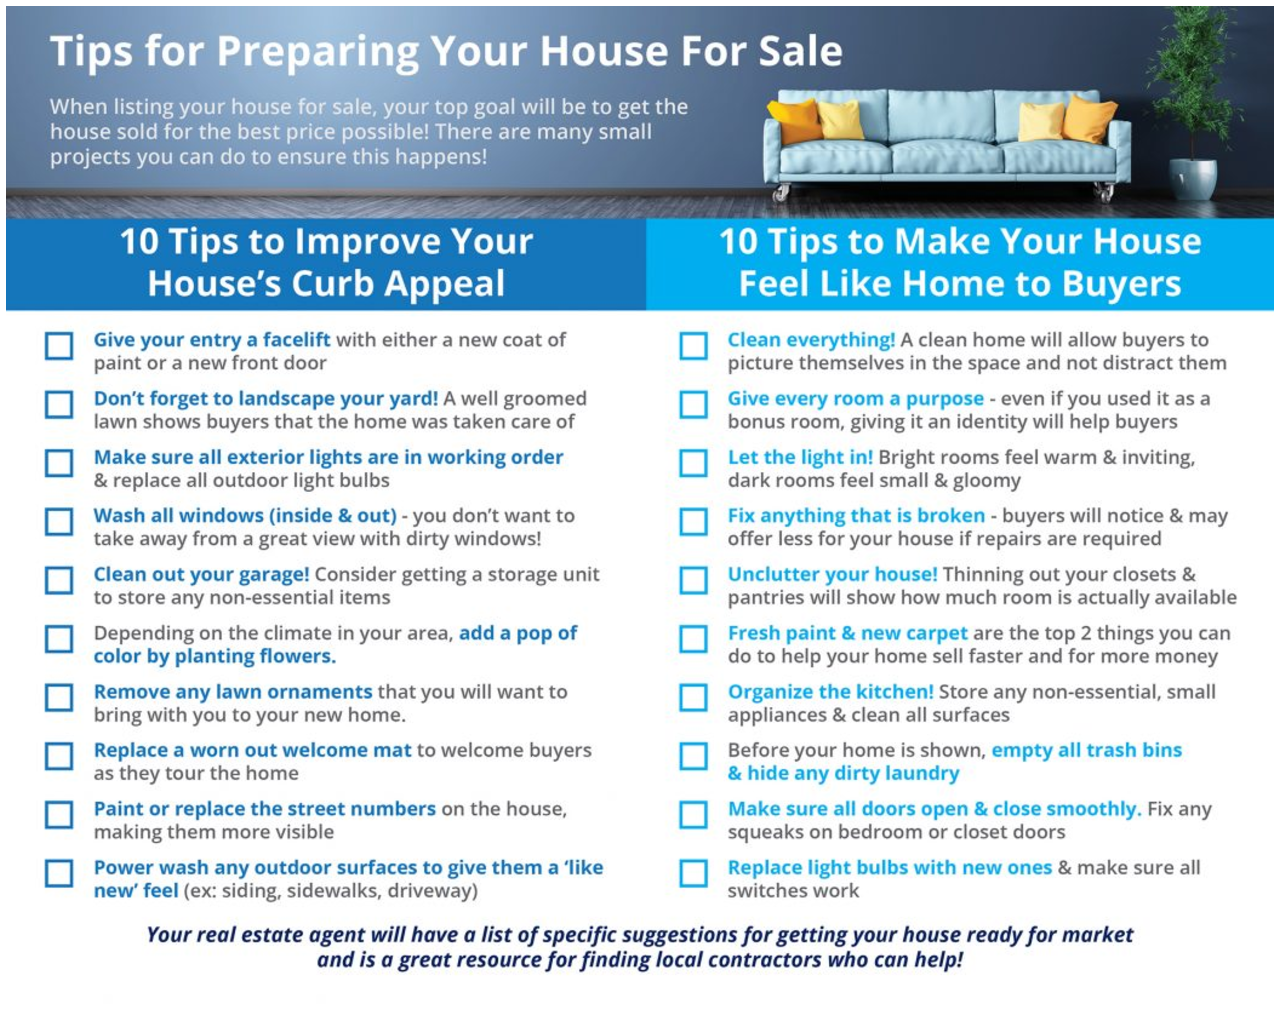 20 Simple Tips for Preparing Your House For Sale [INFOGRAPHIC]